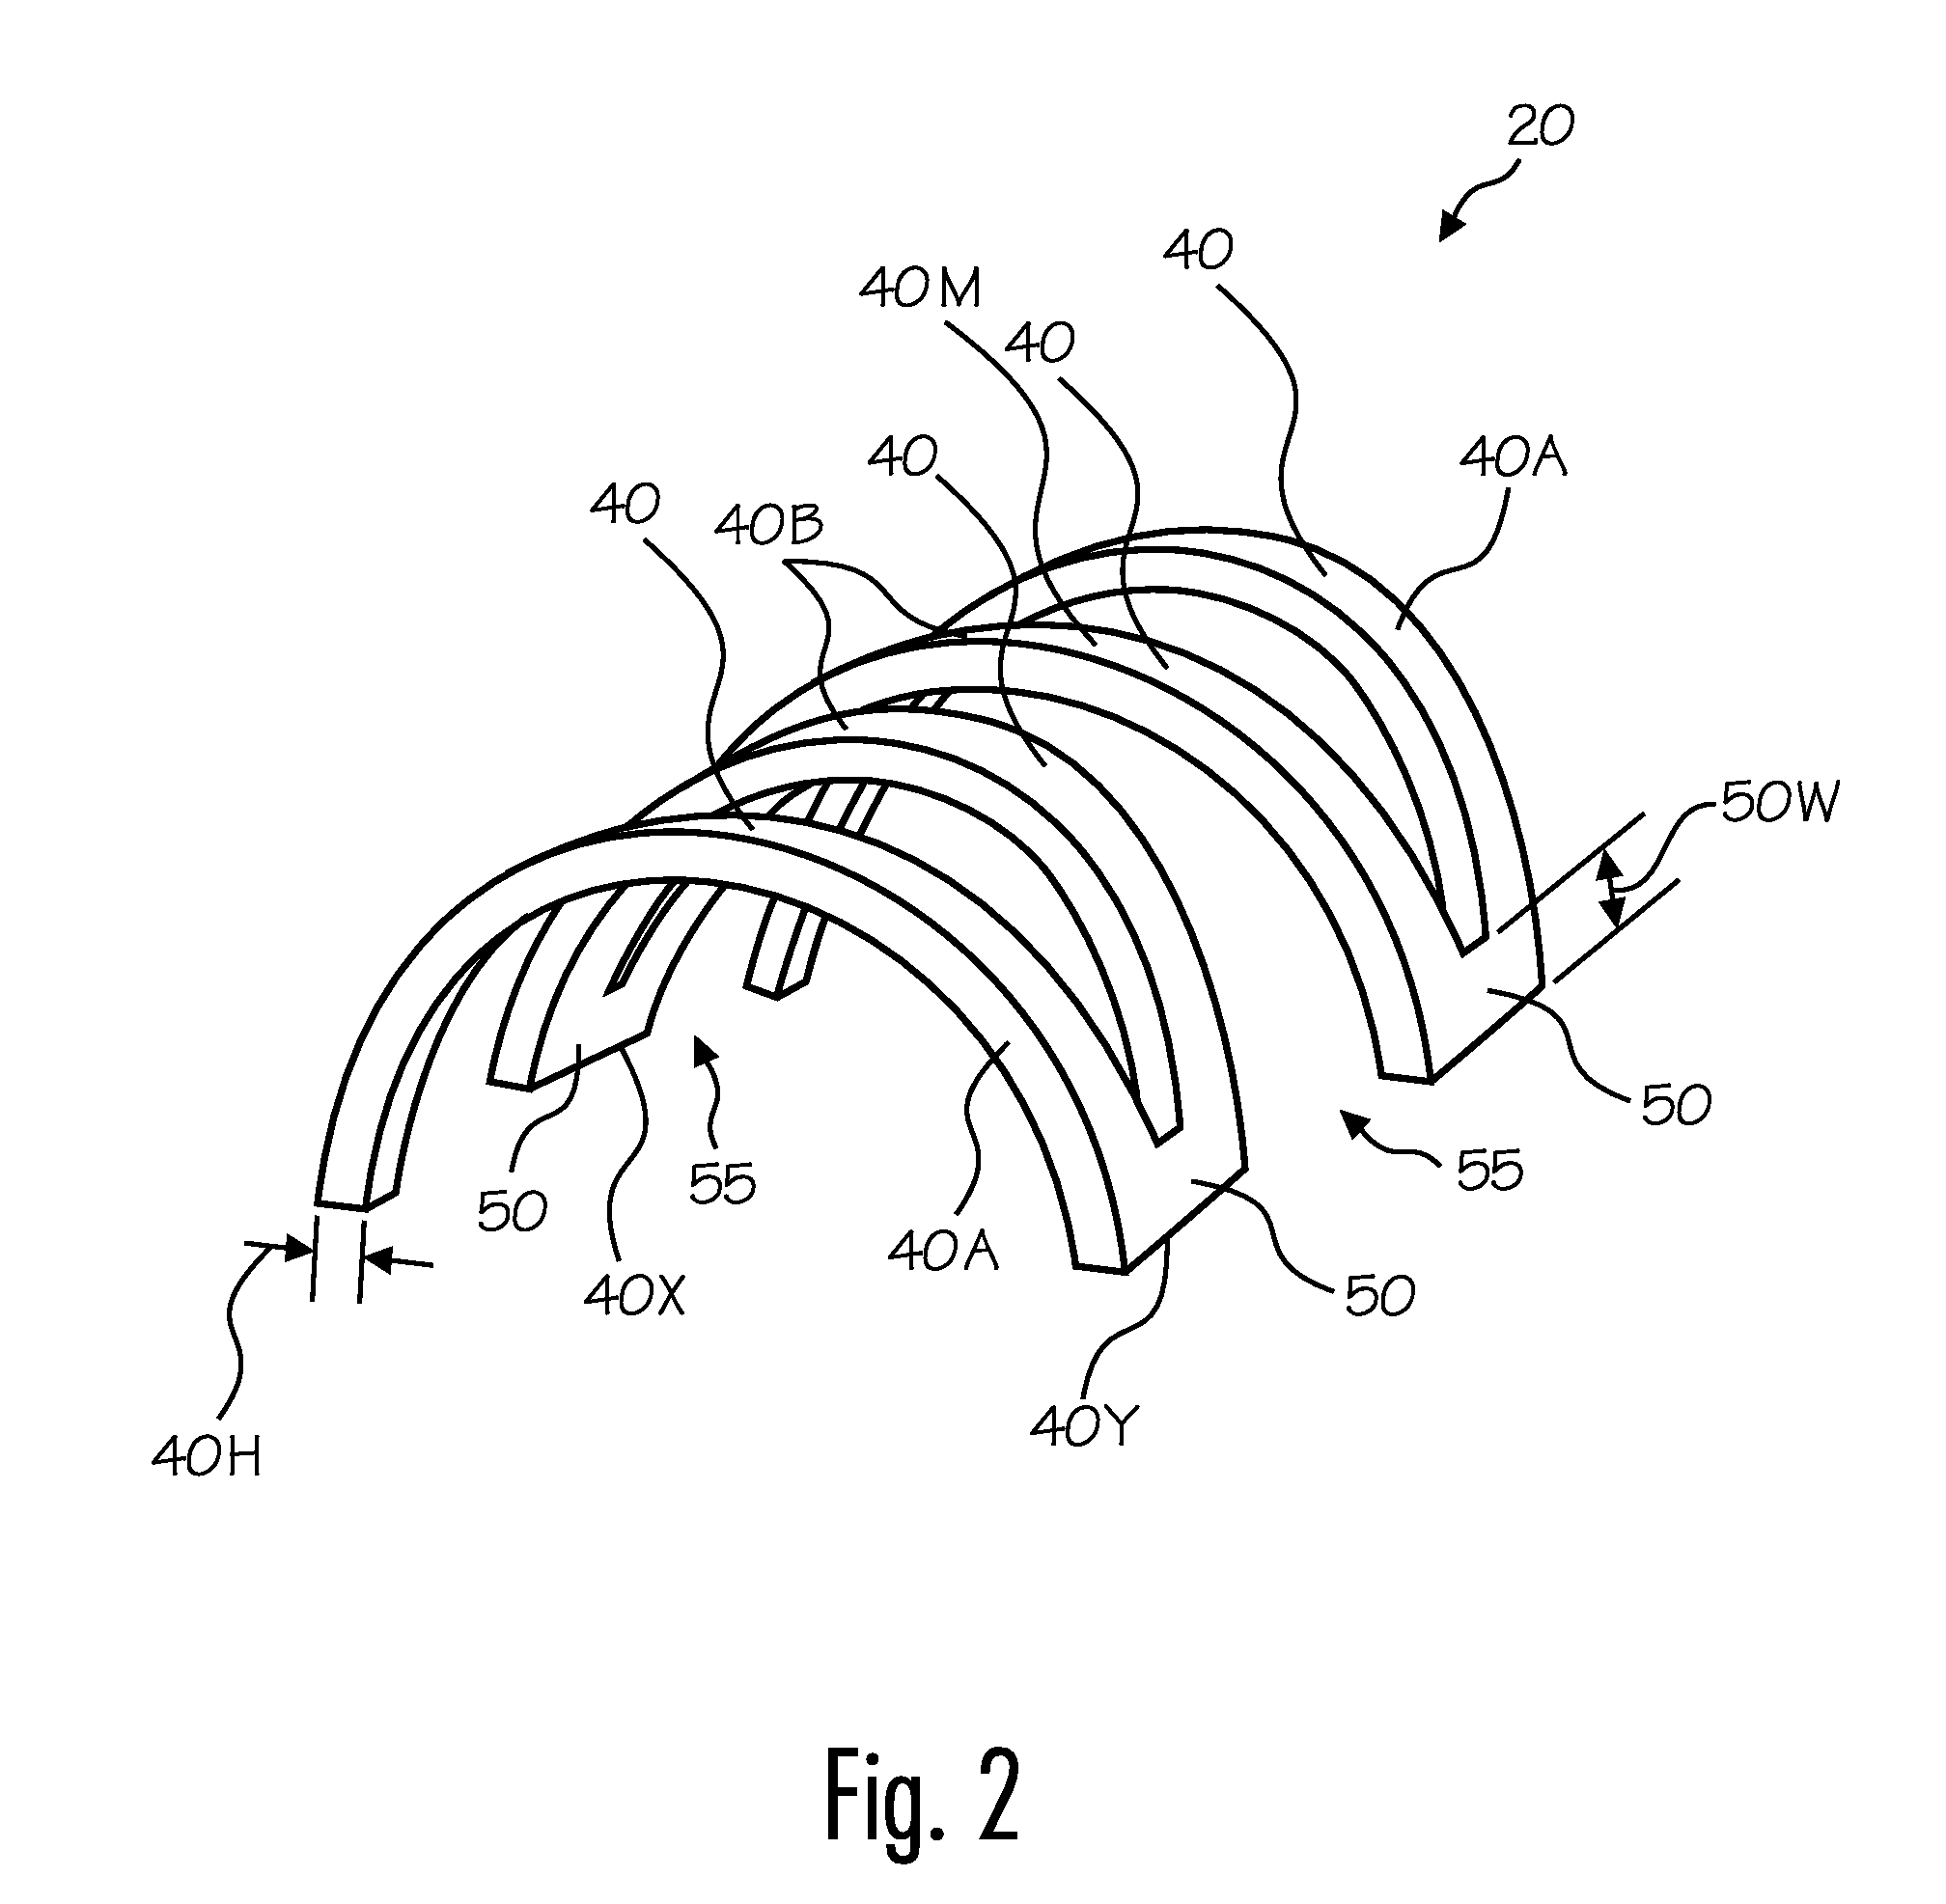 Flexible structural apparatus, spring, wound covering, and methods